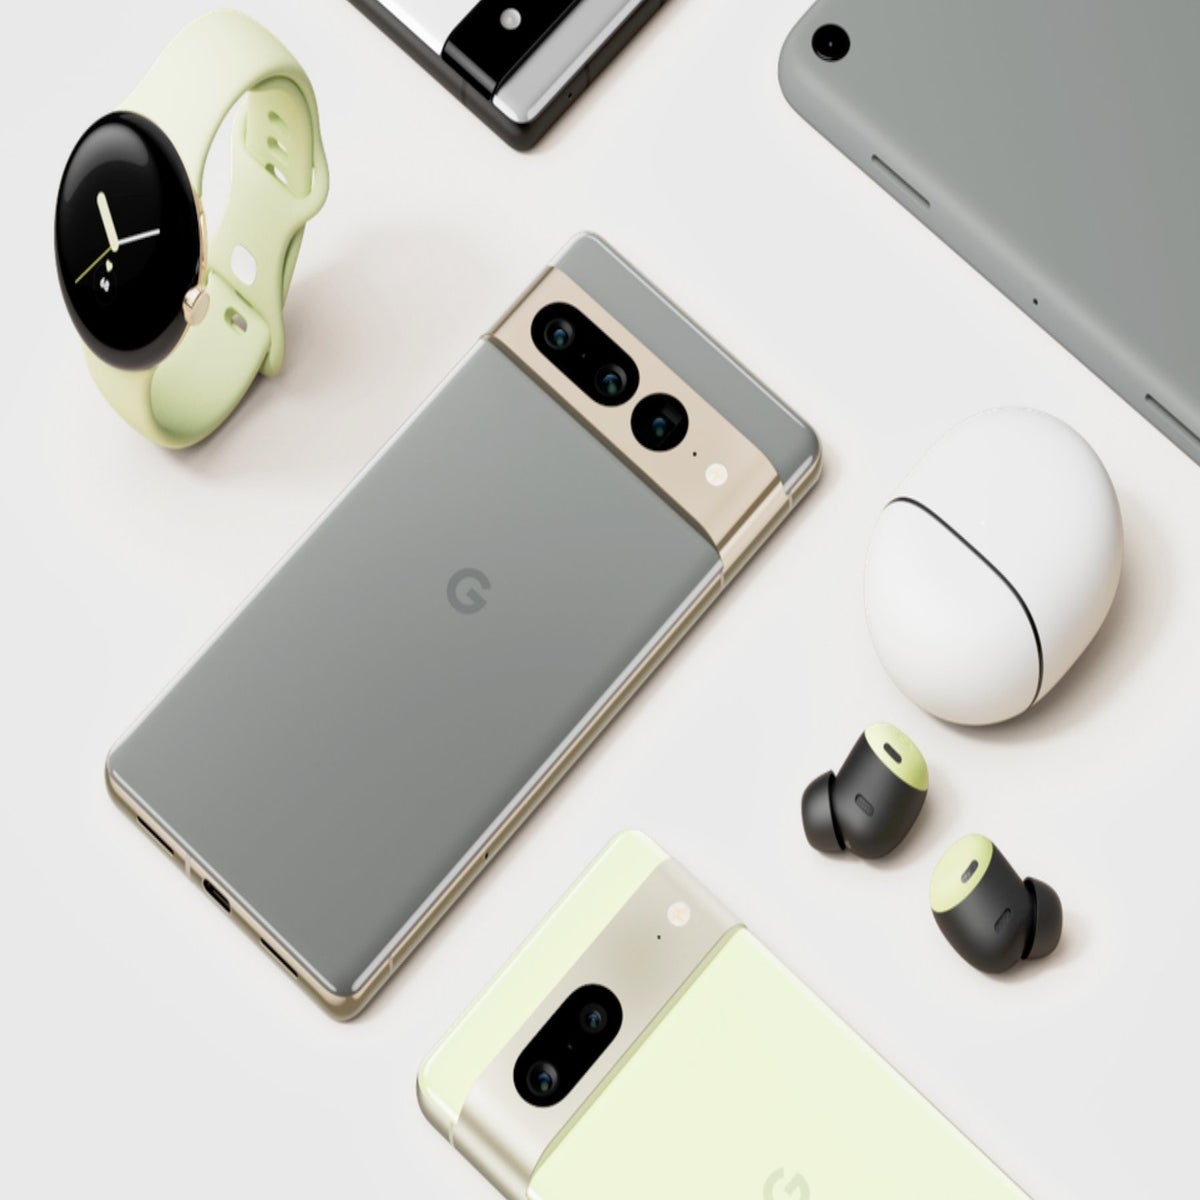 Google Pixel 7a color options and spec sheet leaked